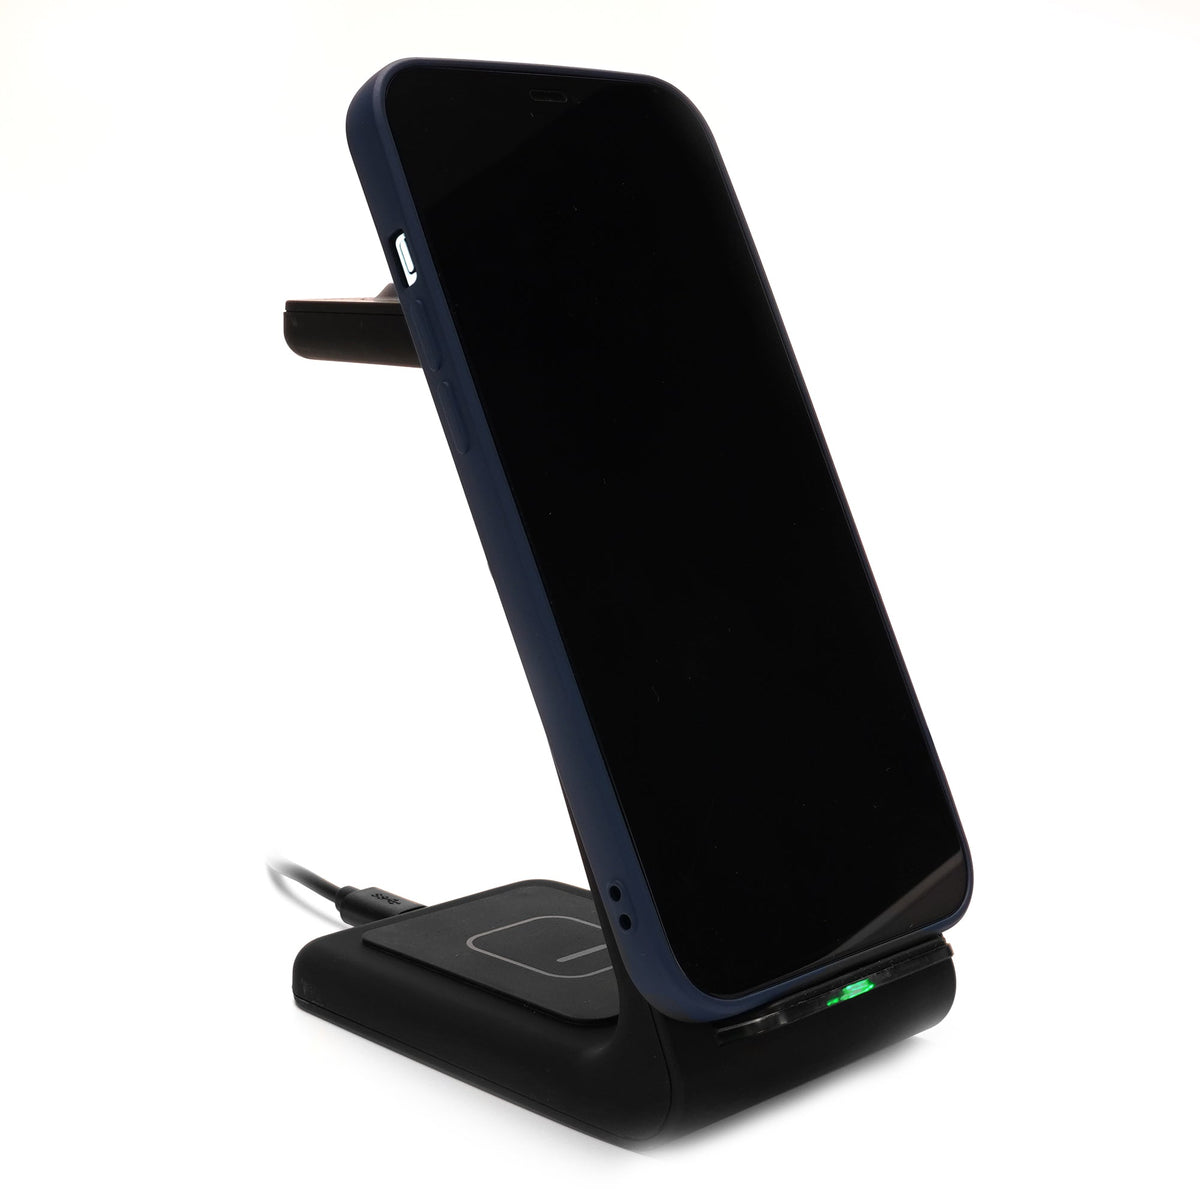 Premium 3 in 1 Fast Wireless Charging Stand for iPhone, Apple Watch &amp; AirPods - Moderno Collections